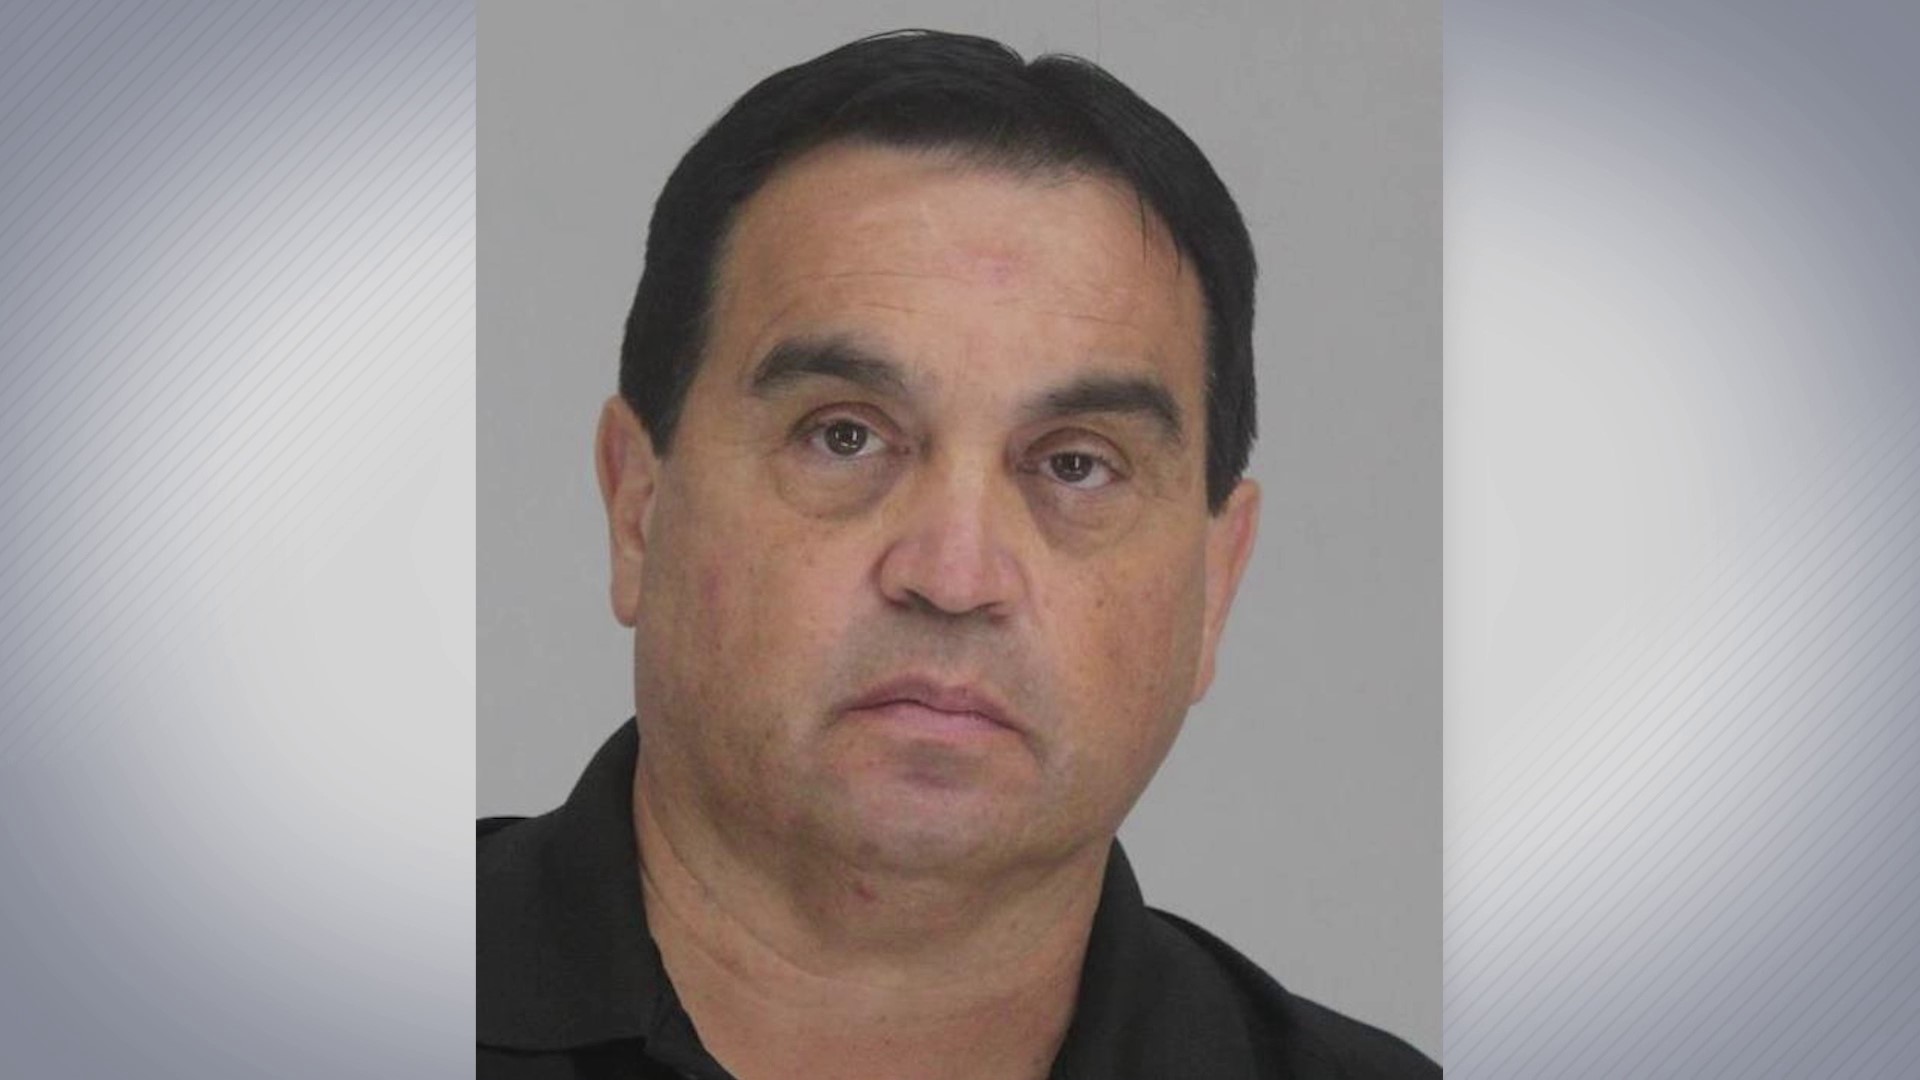 Dr. Raynaldo Rivera Ortiz Jr. is accused of allegedly tampering with an IV at Baylor Scott & White Surgicare North Dallas.